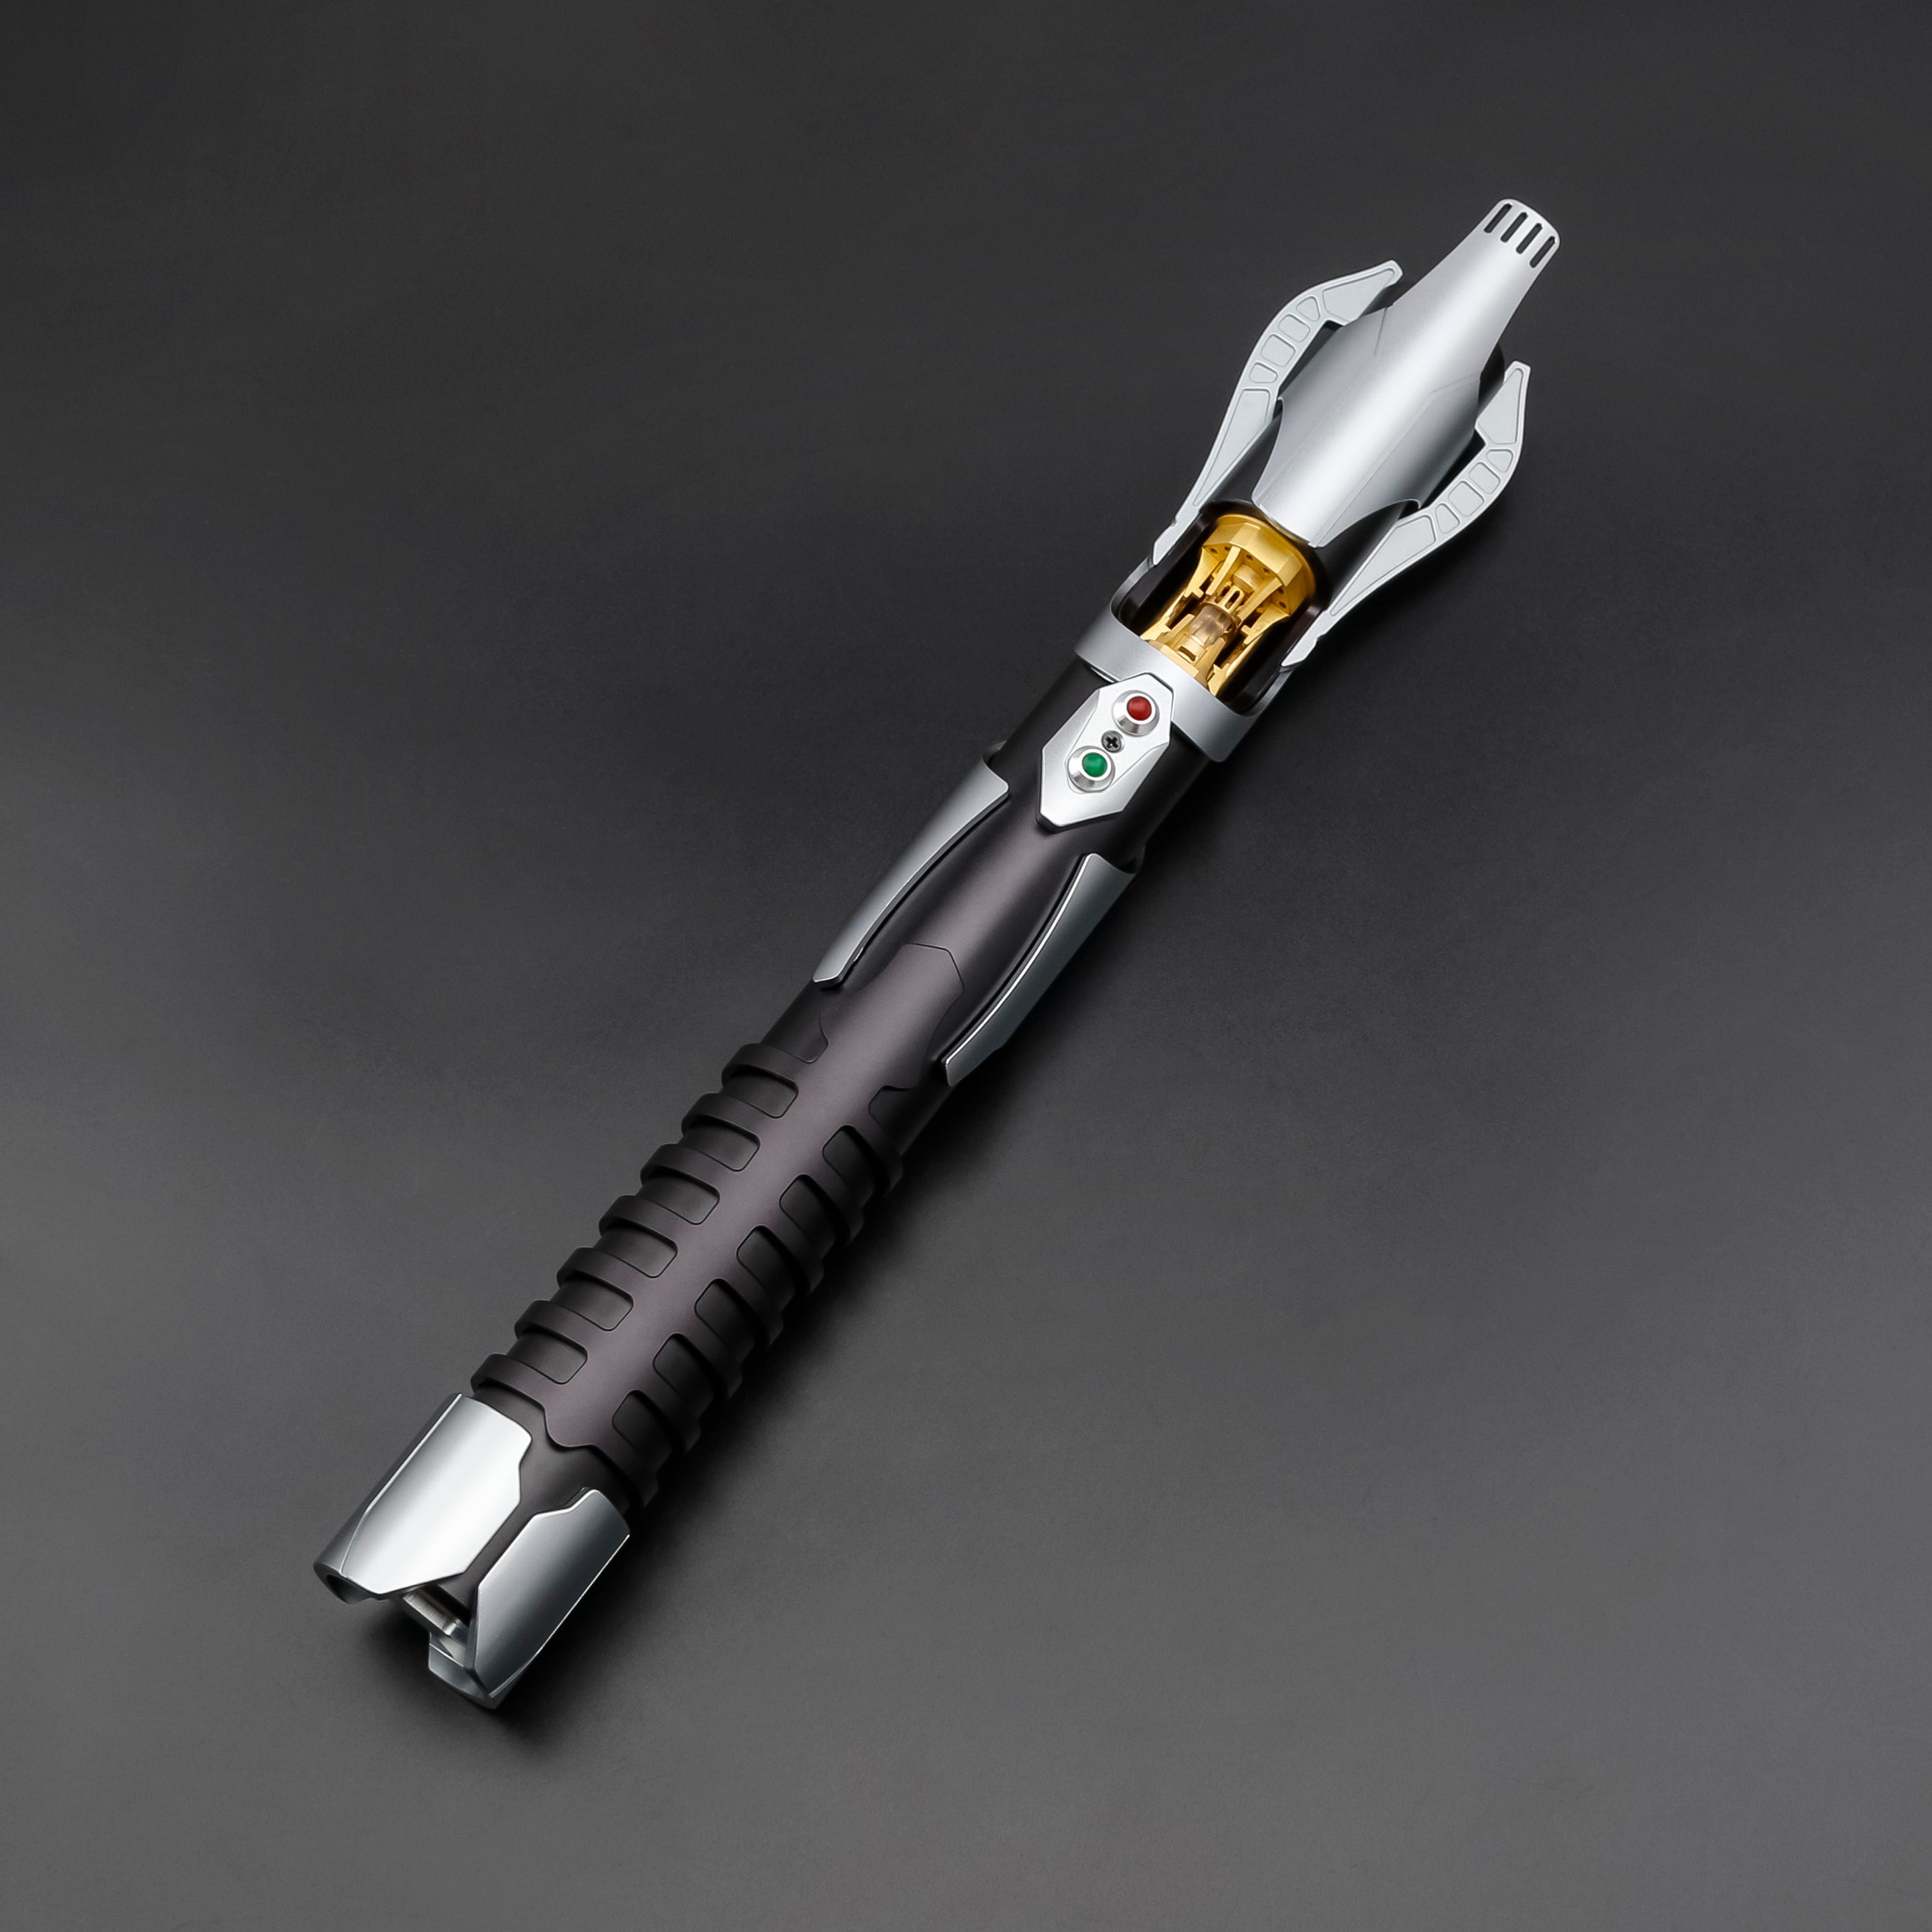 Commodore Crystal Saber